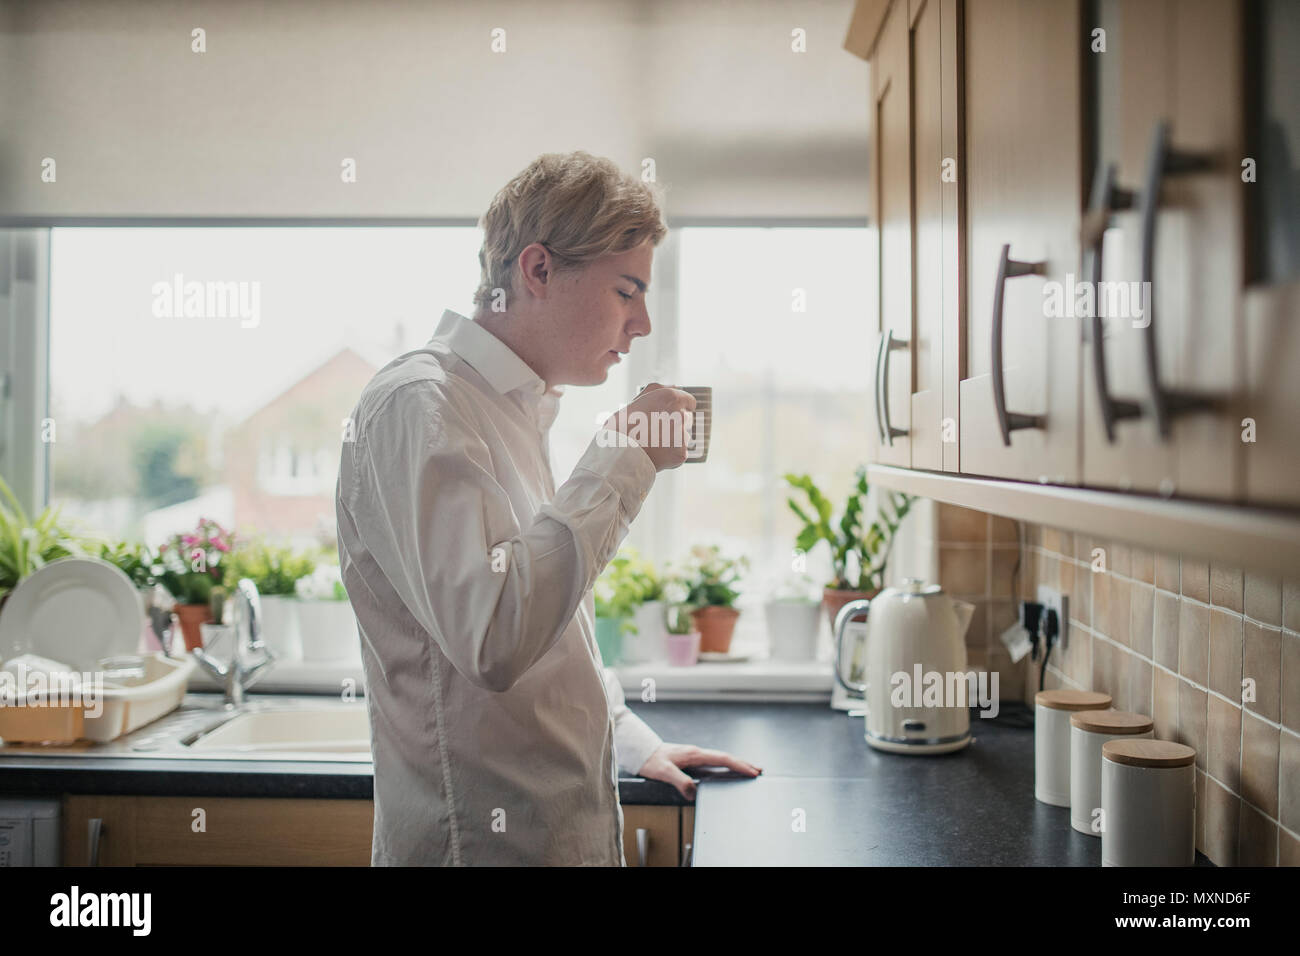 Side view of a young adult businessman standing at the kitchen counter blowing on a cup of tea to cool it down. Stock Photo